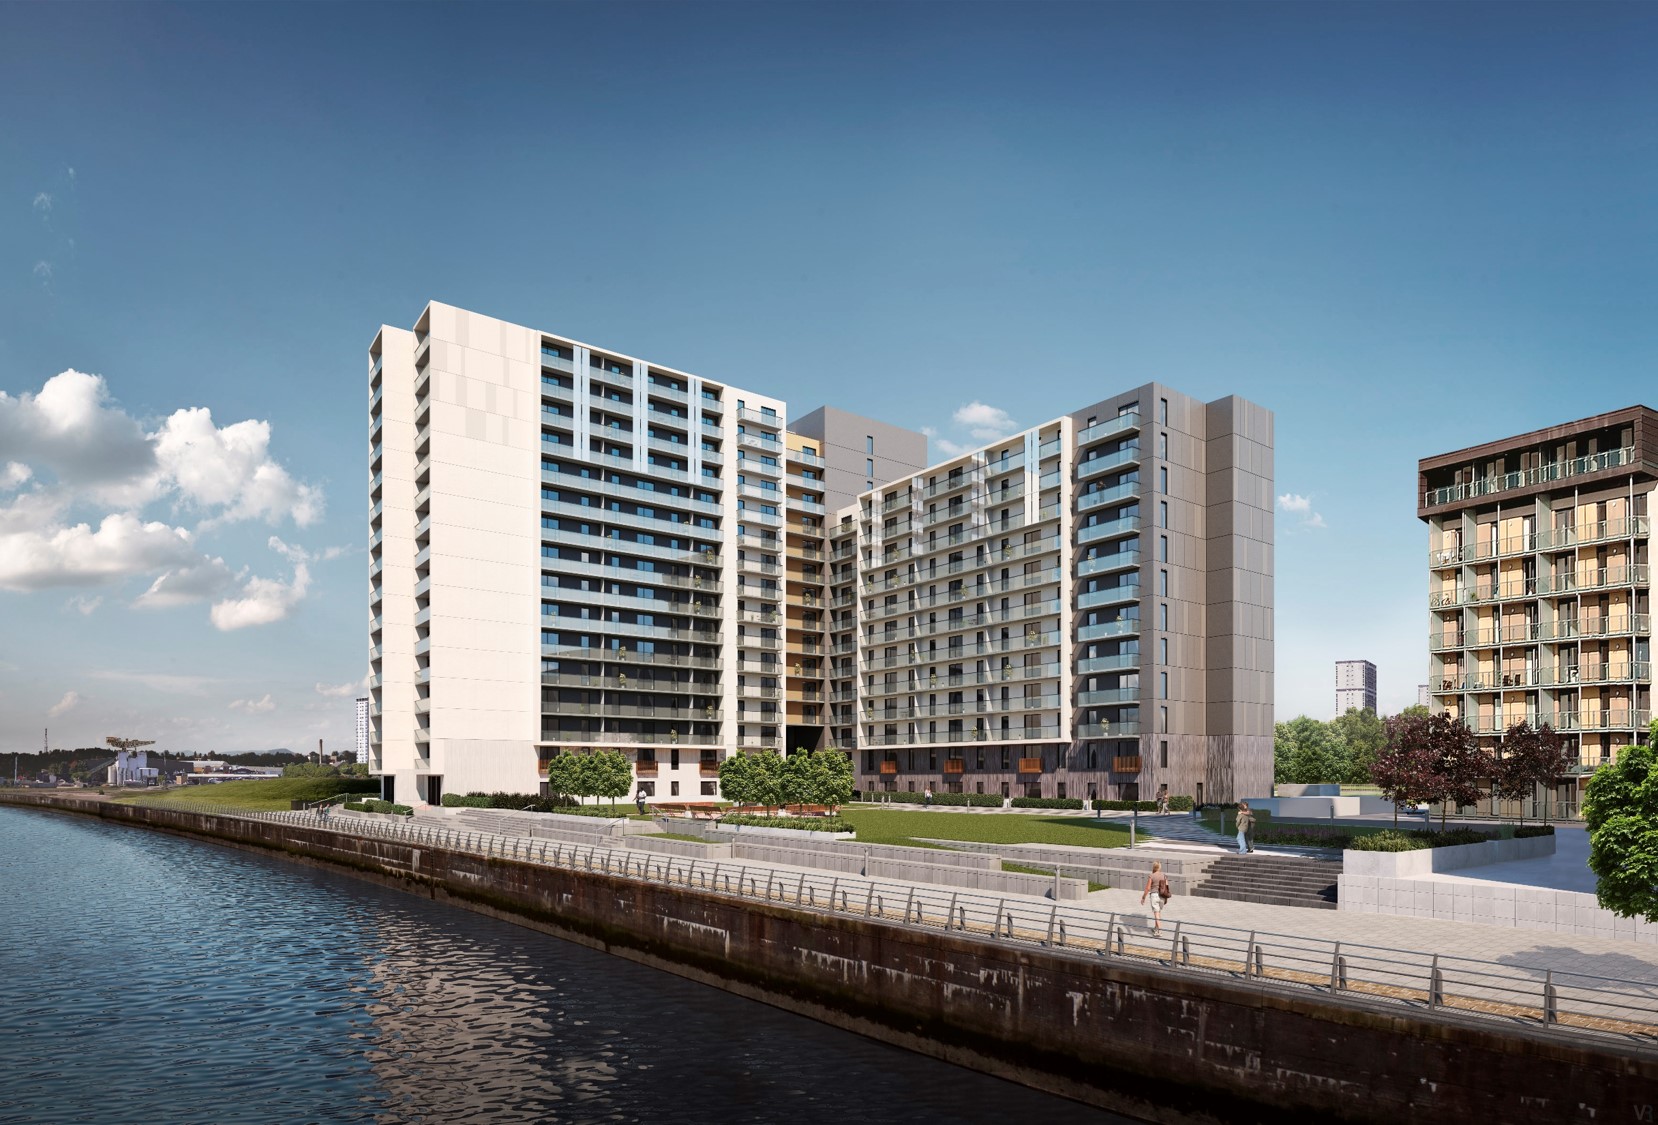 Dandara Living to build 342 apartments in Glasgow's West End thanks to £60m HSBC UK funding